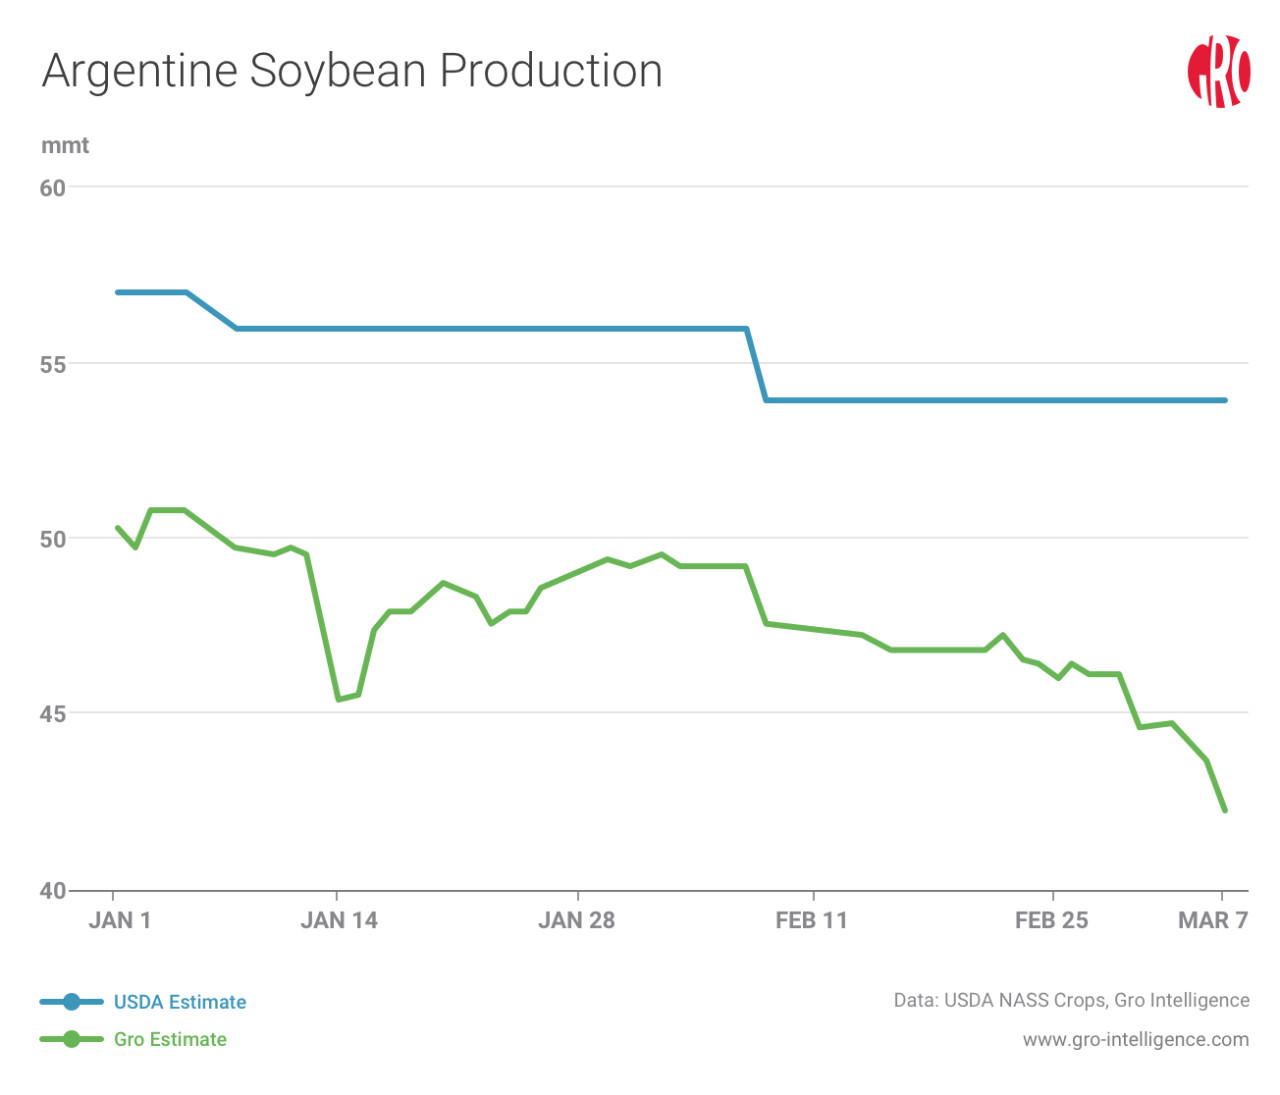 Argentine Soybean Production